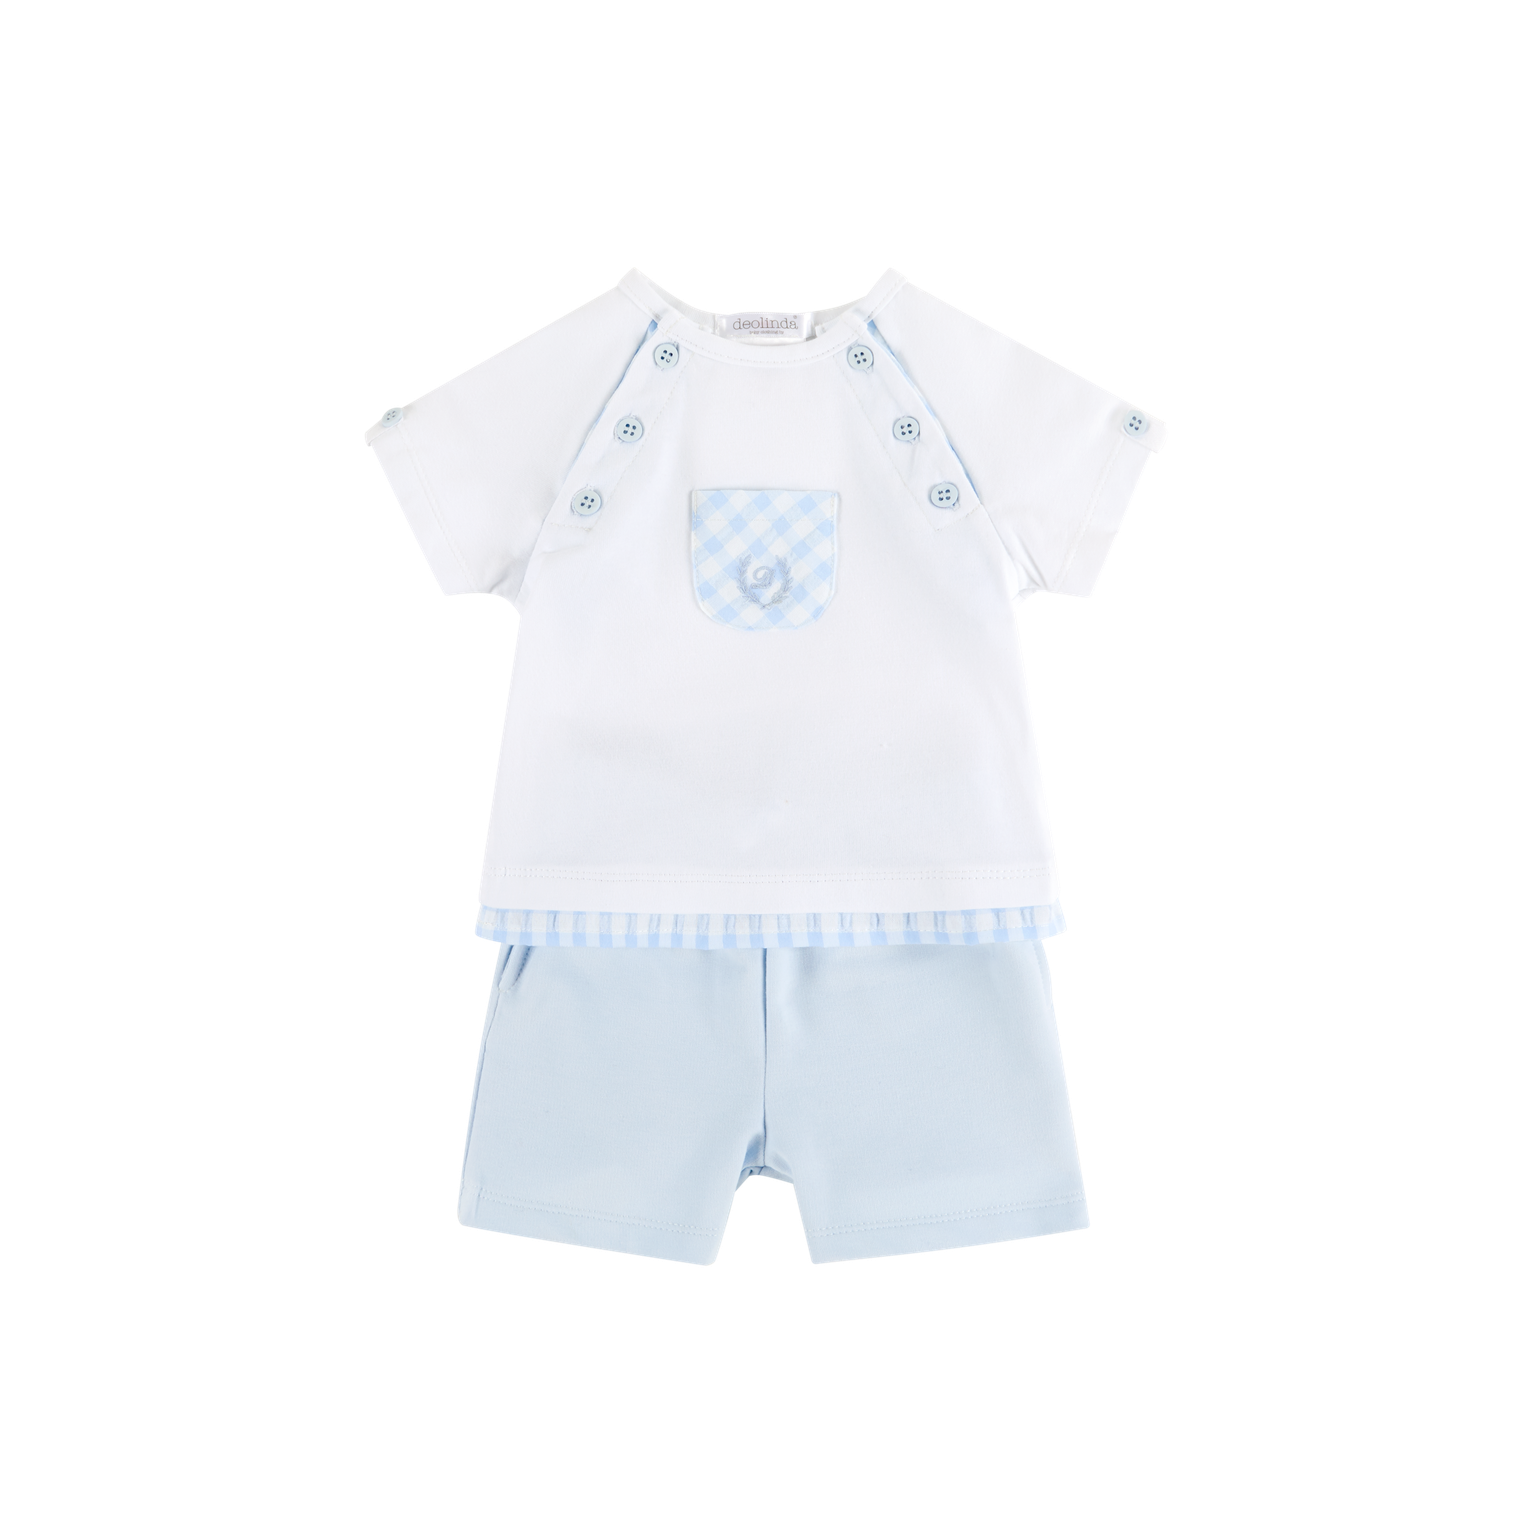 Deolinda Boys Check and Button Detail Short Set 236407